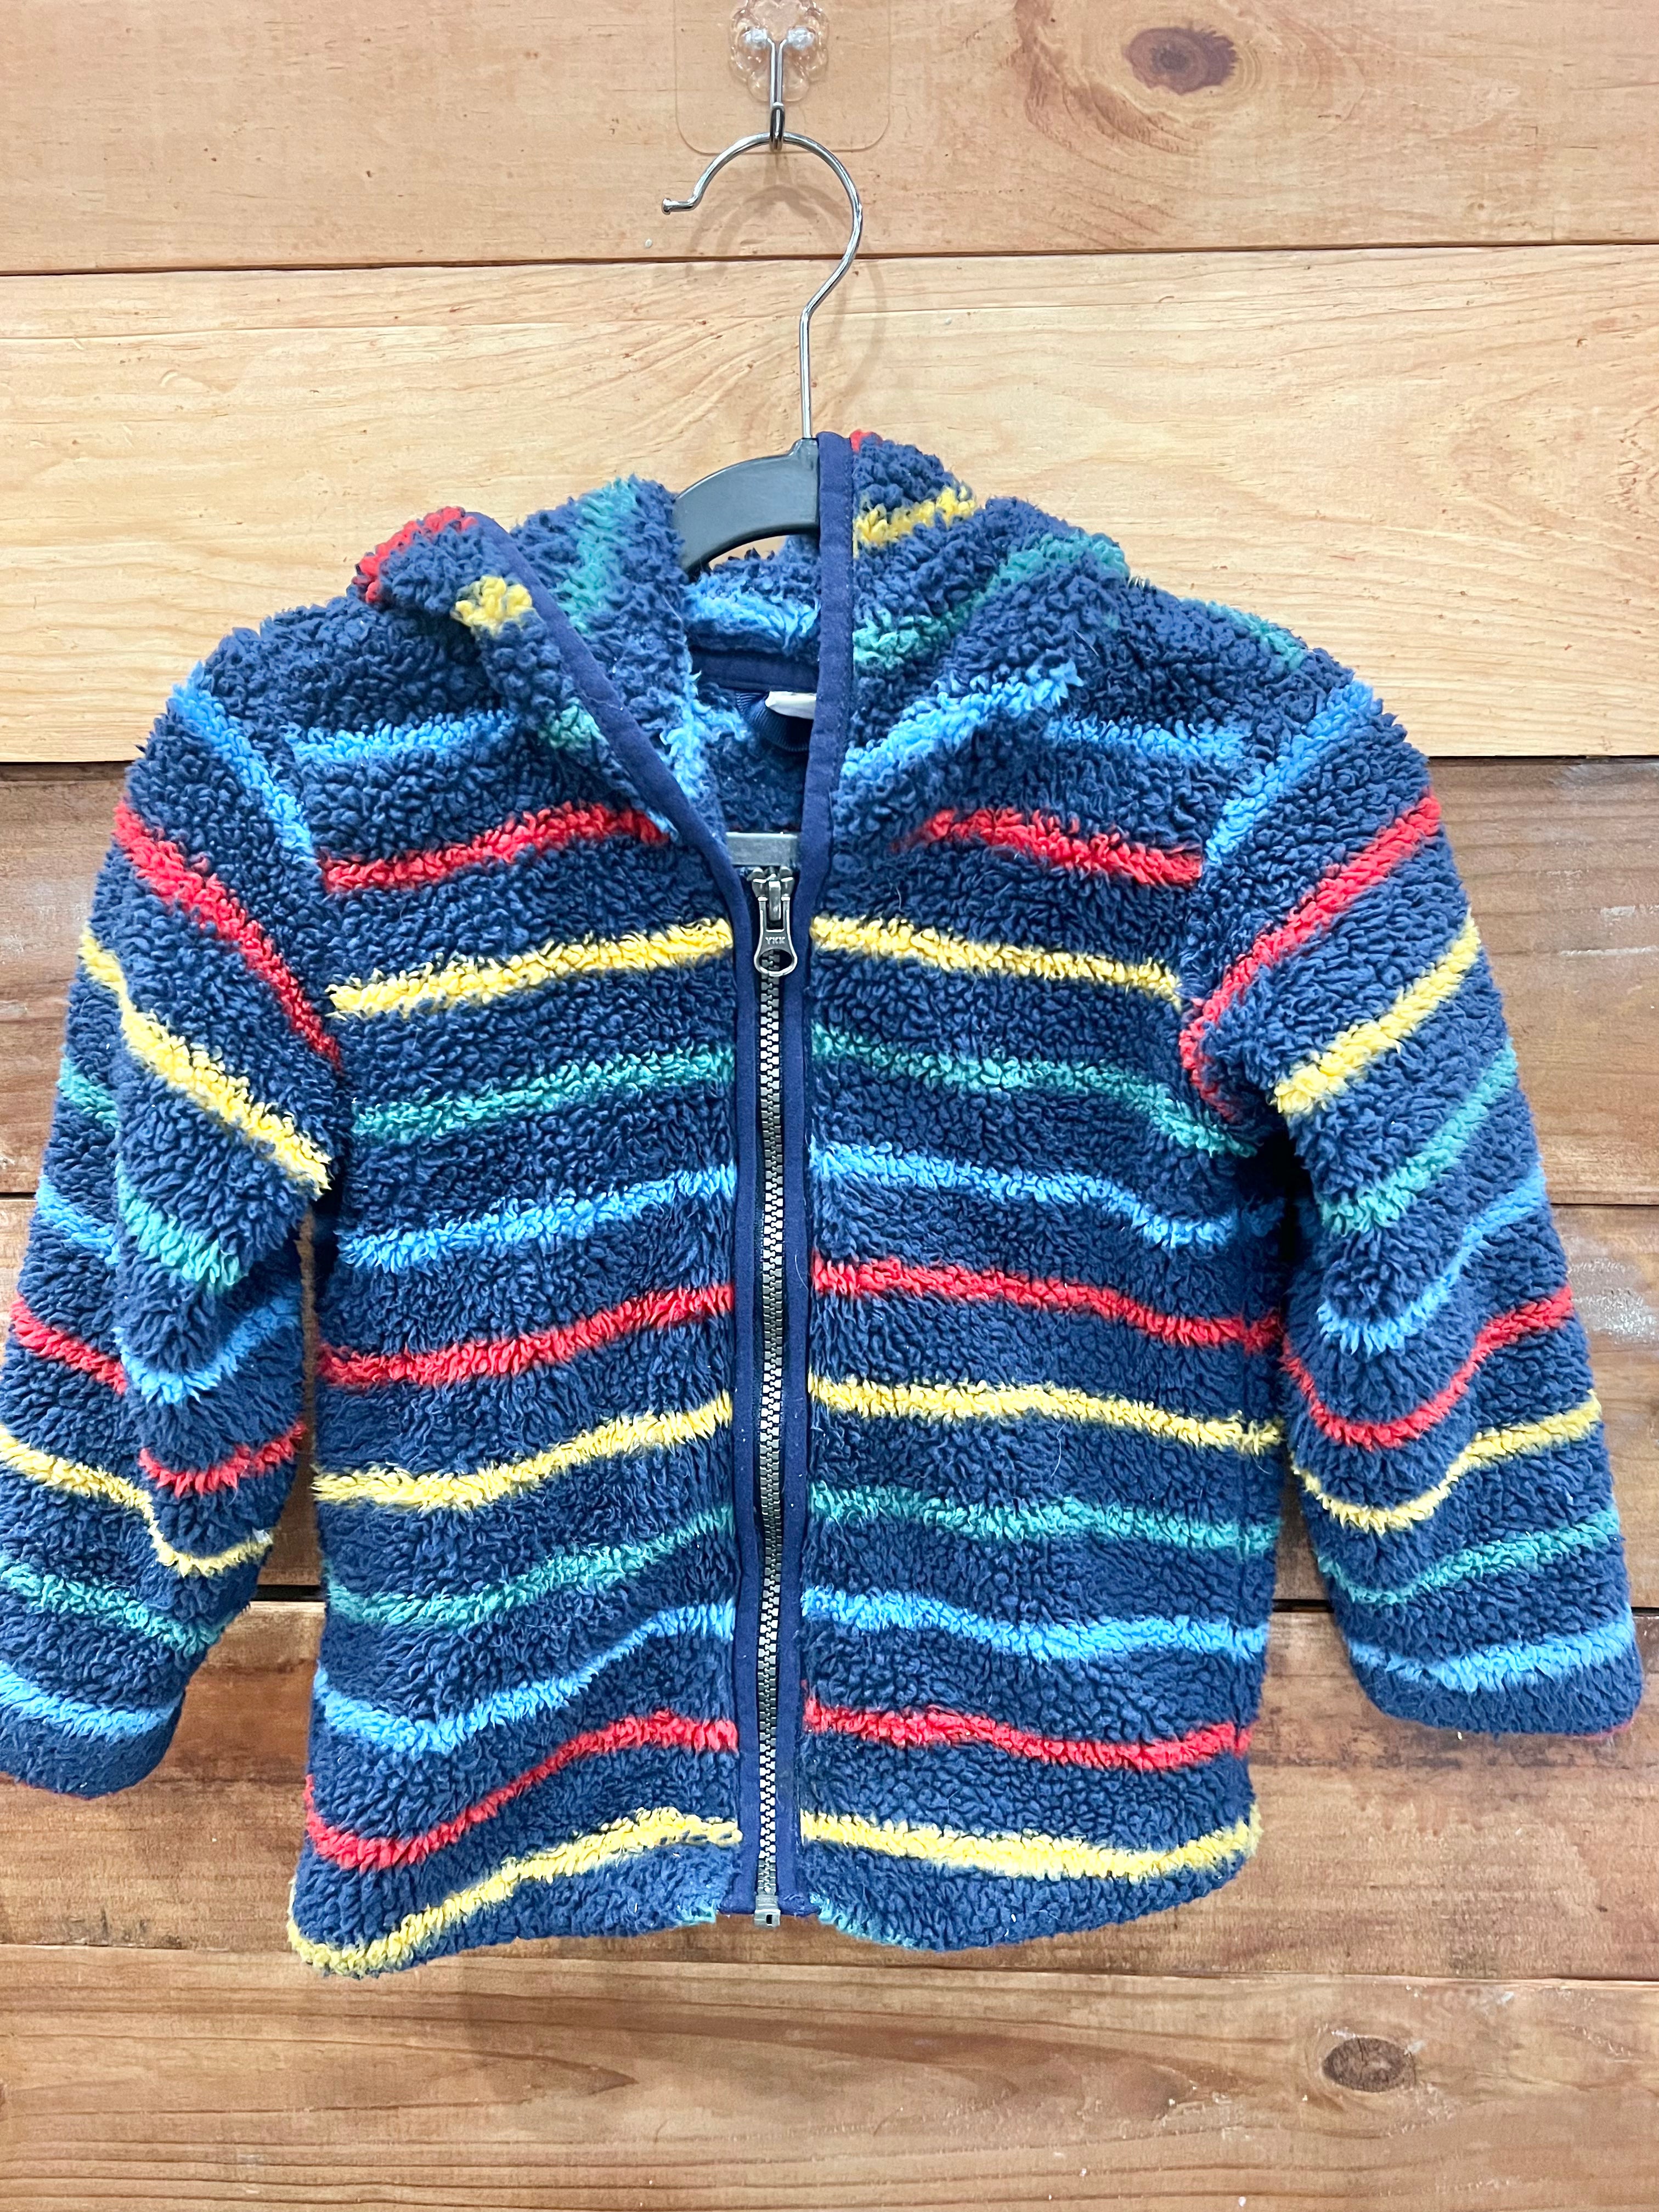 hanna Andersson Striped Jacket Size 3T – Three Little Peas